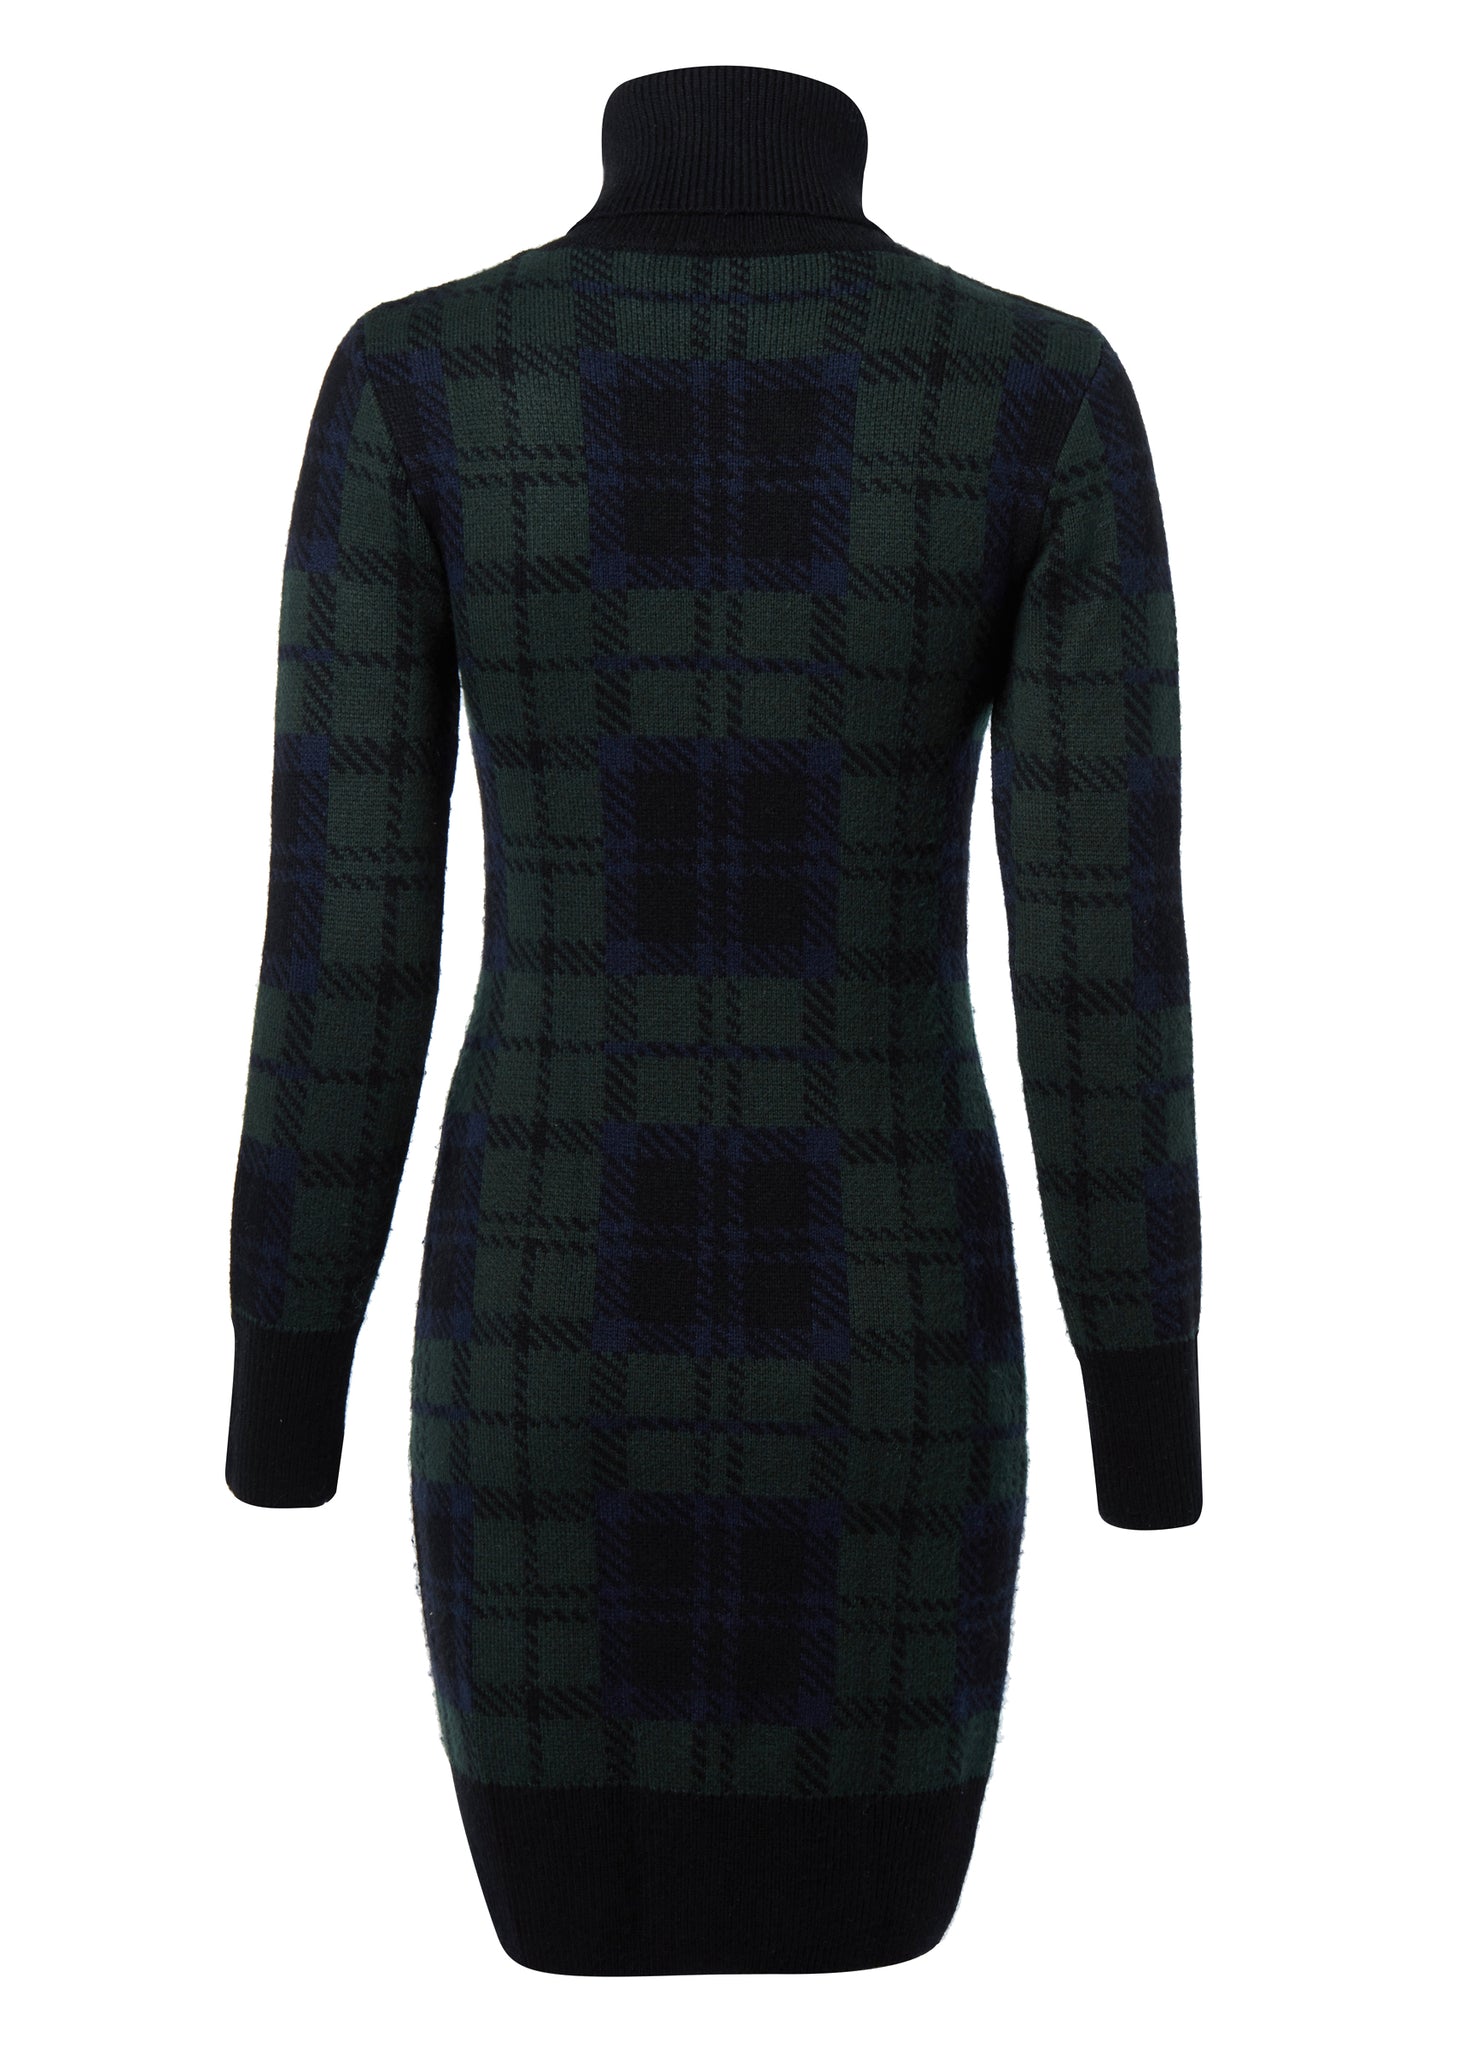 back of womens green navy and black blackwatch roll neck jumper dress with contrast black cuffs and ribbed hem with gold button detail on the cuffs and shoulder